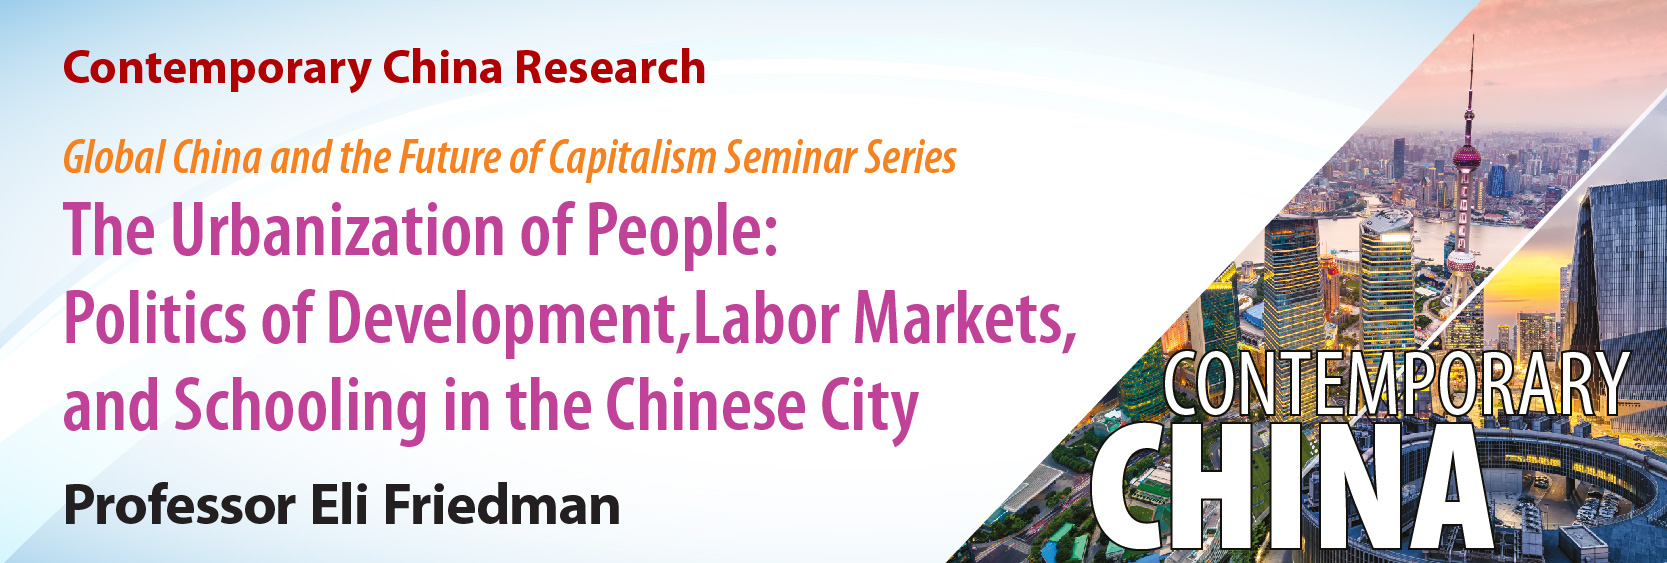 the urbanization of people: politics of development, labor markets, and schooling in the Chinese city